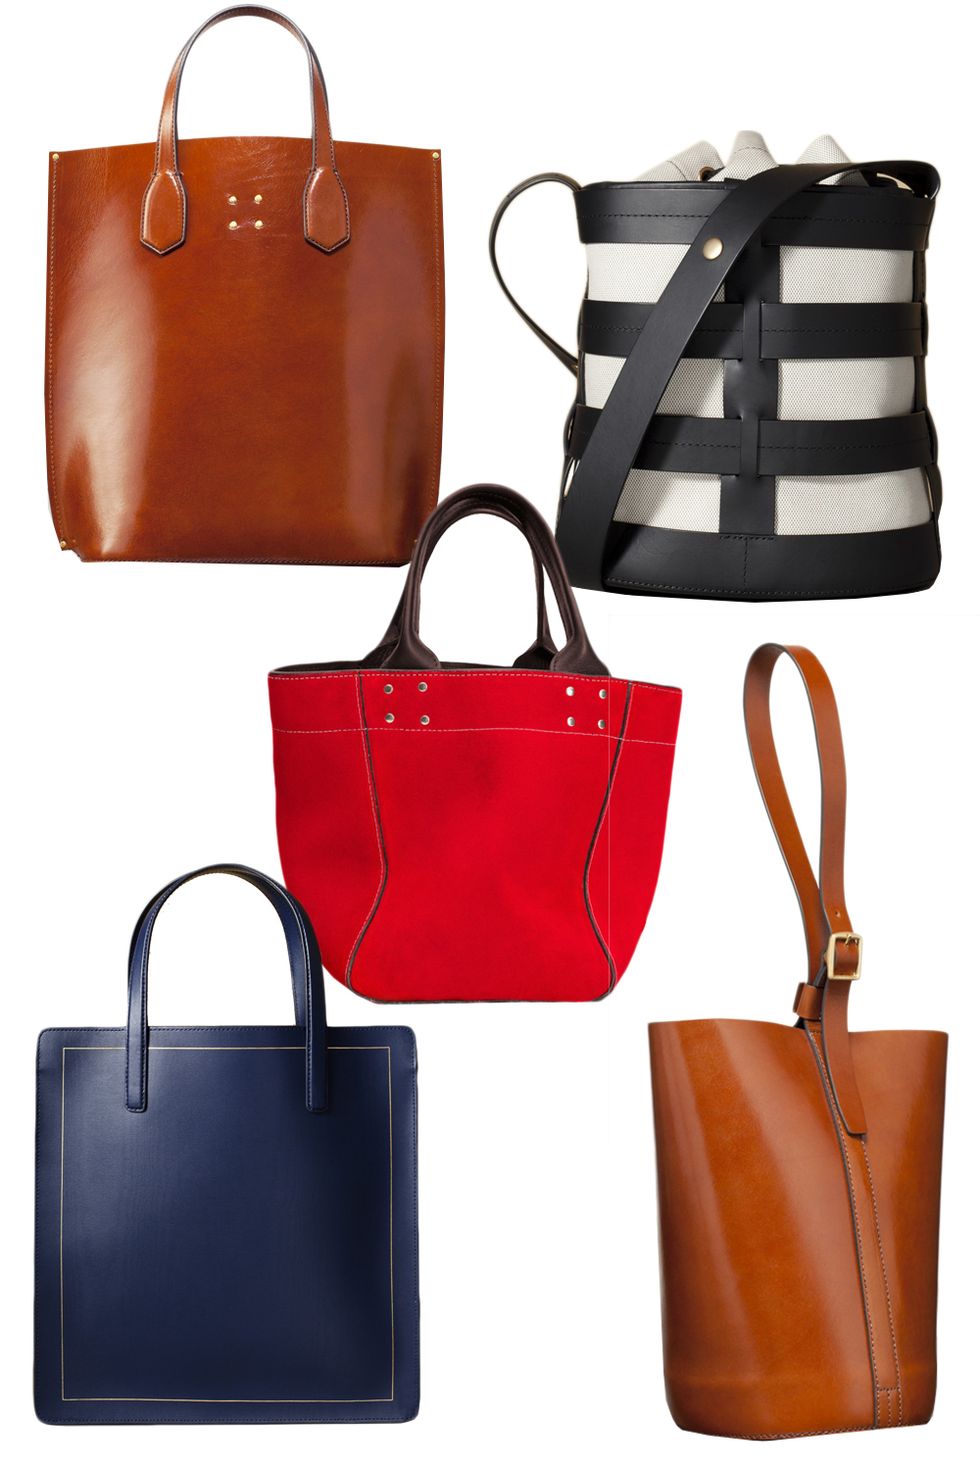 10 Designer Bags To Invest In For 2016